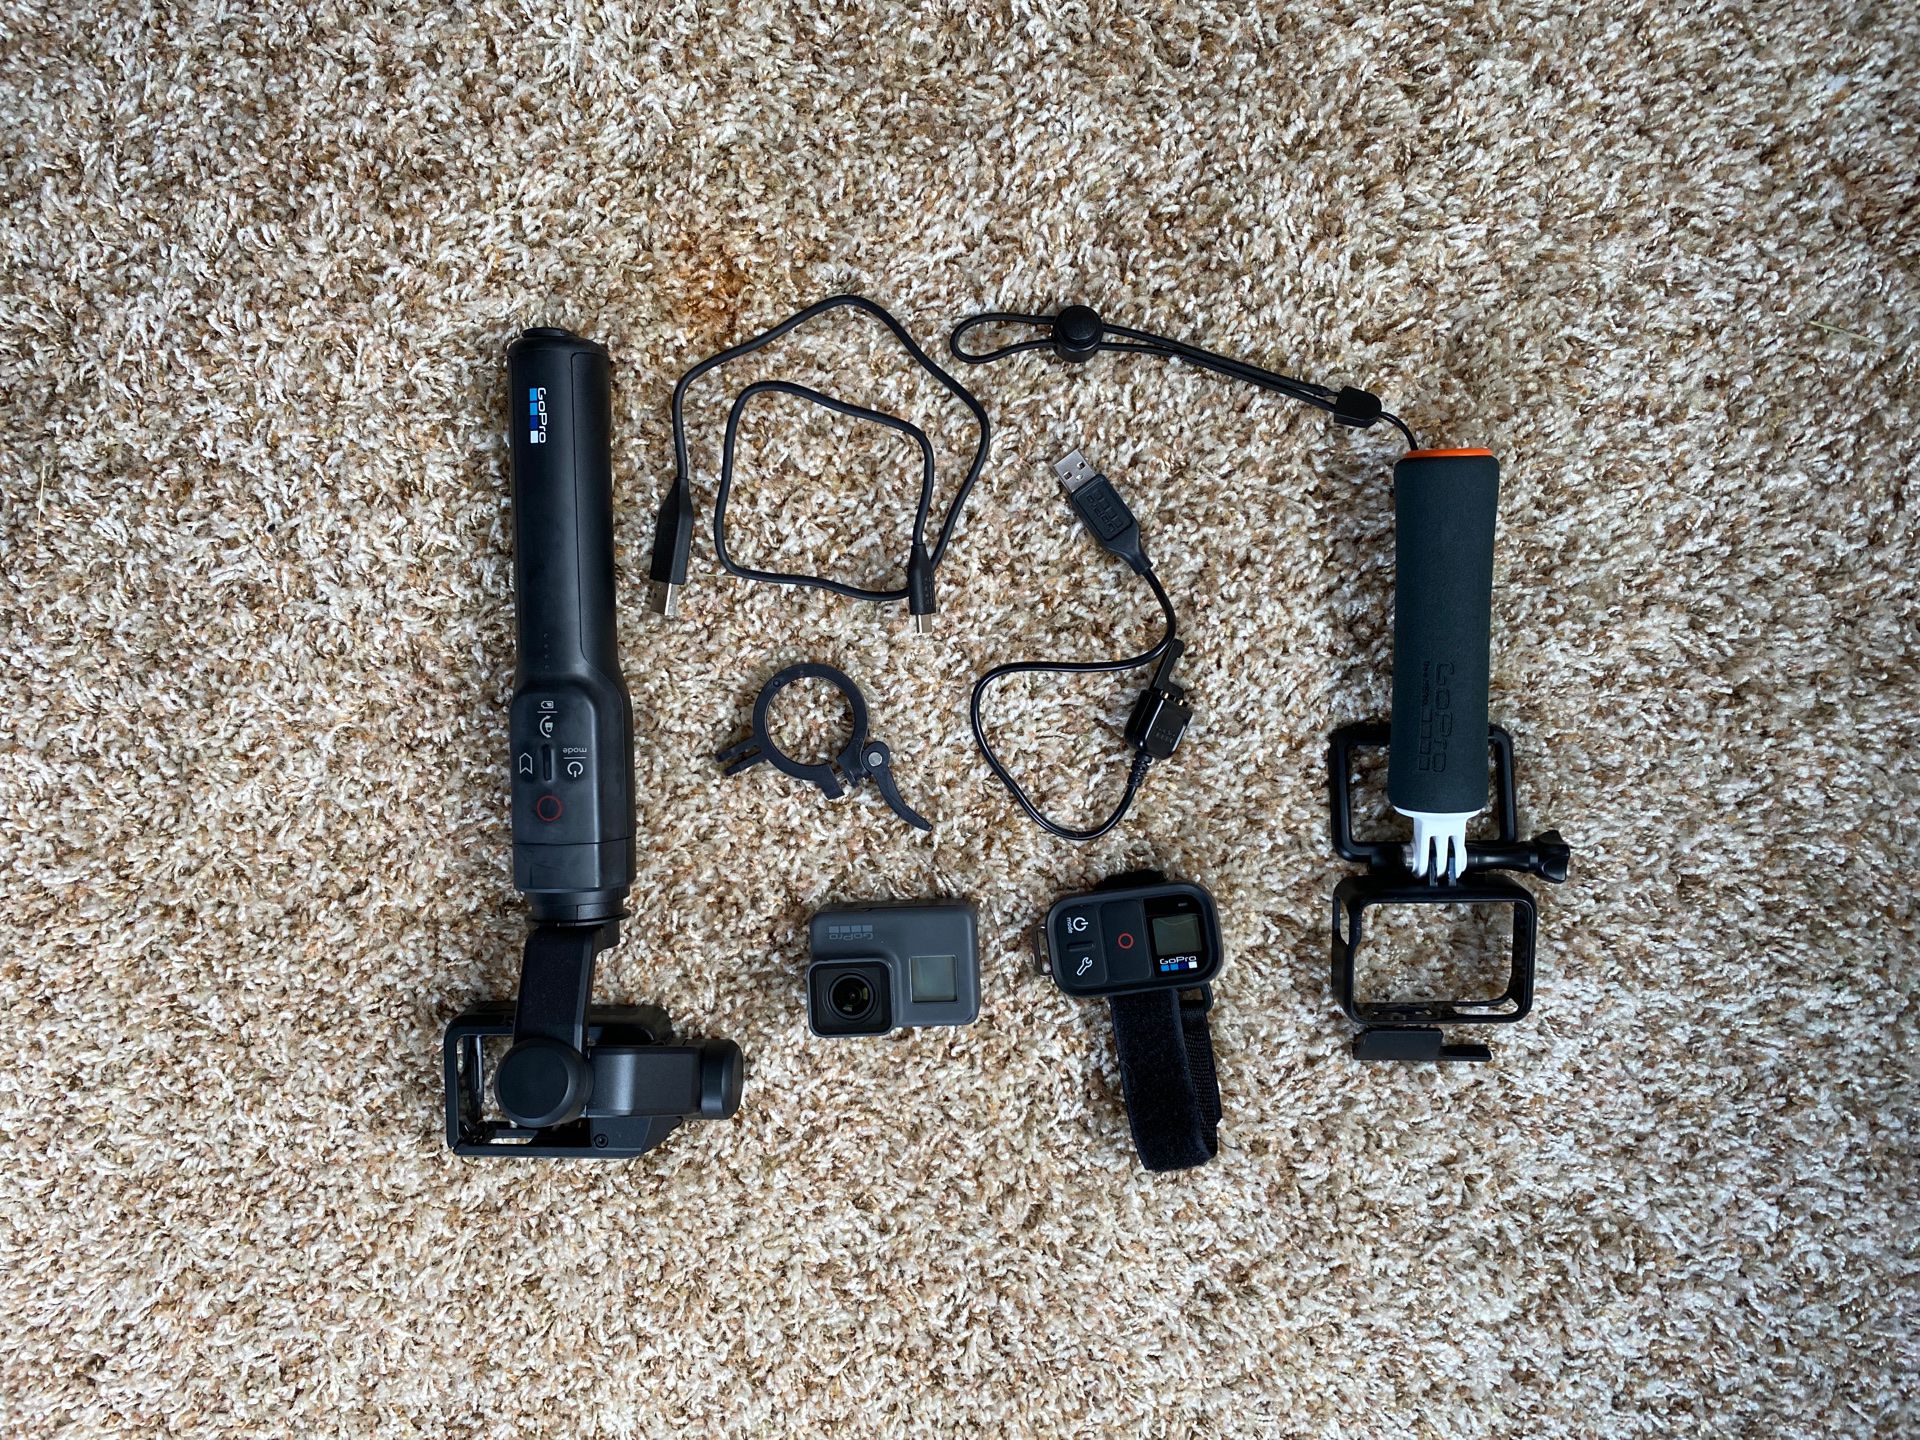 GoPro hero 5 lot, karma stabilizer included, trying to trade up